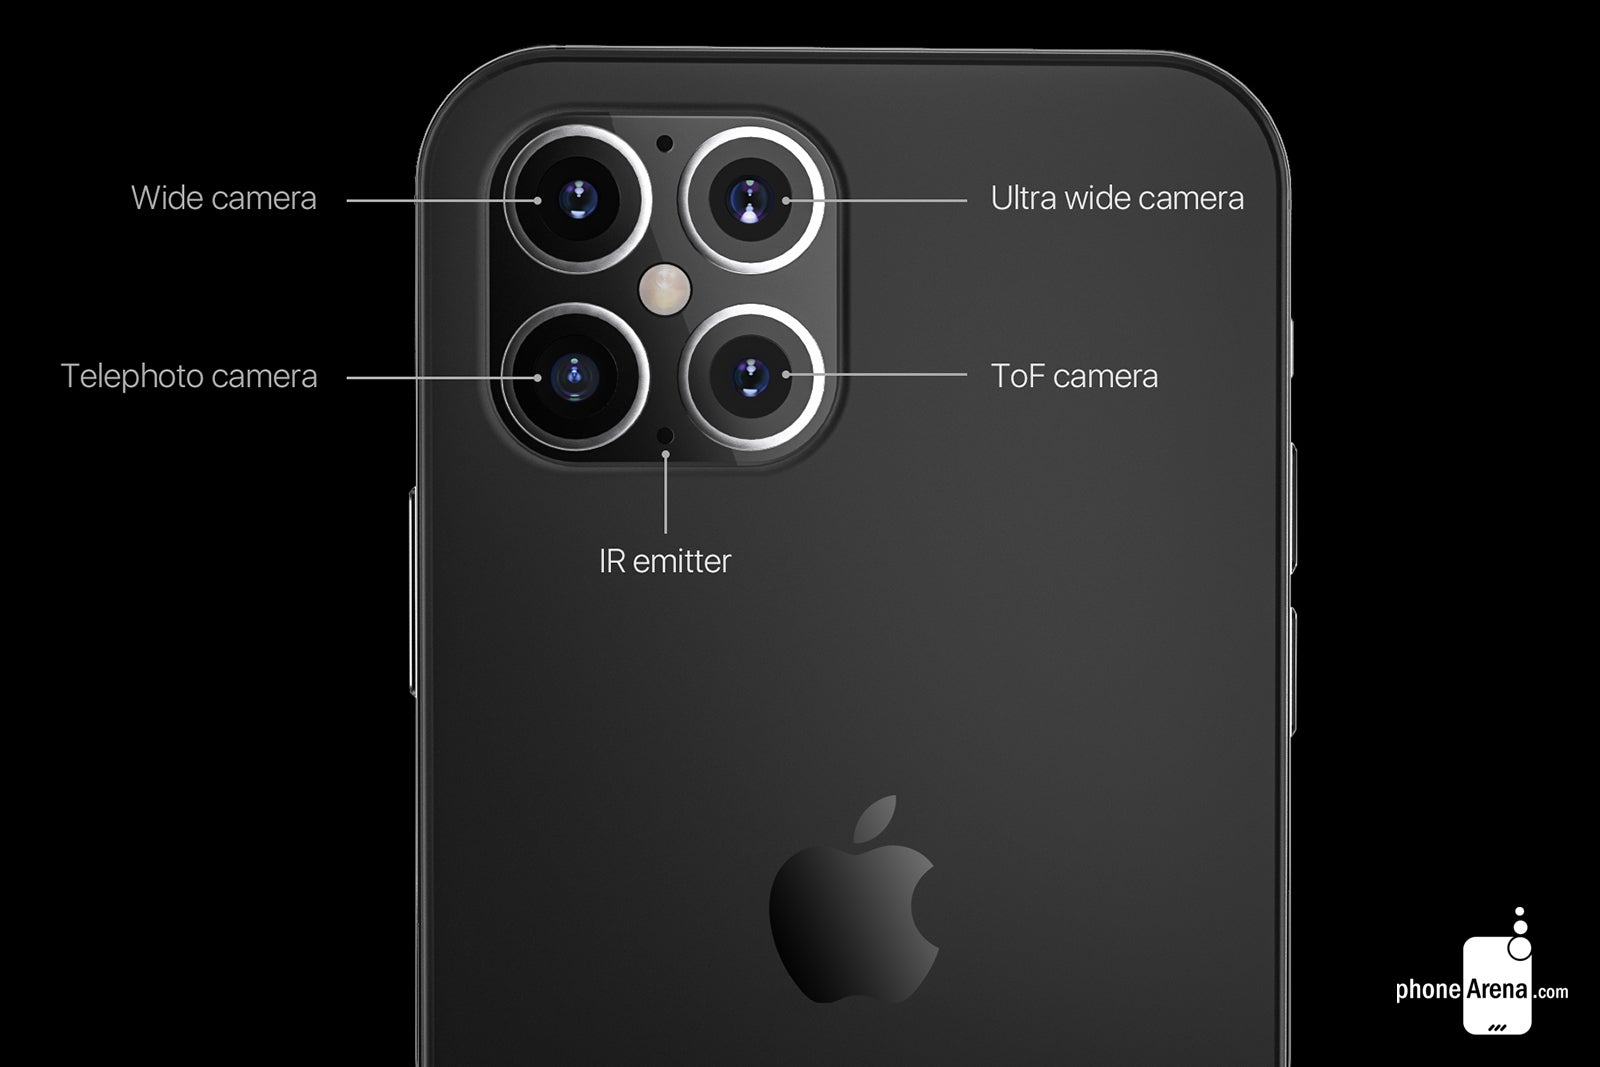 Render of the rear camera setup on the iPhone 12 Pro Max - Foxconn says to expect 5G 2020 Apple iPhone models to be available for the holidays